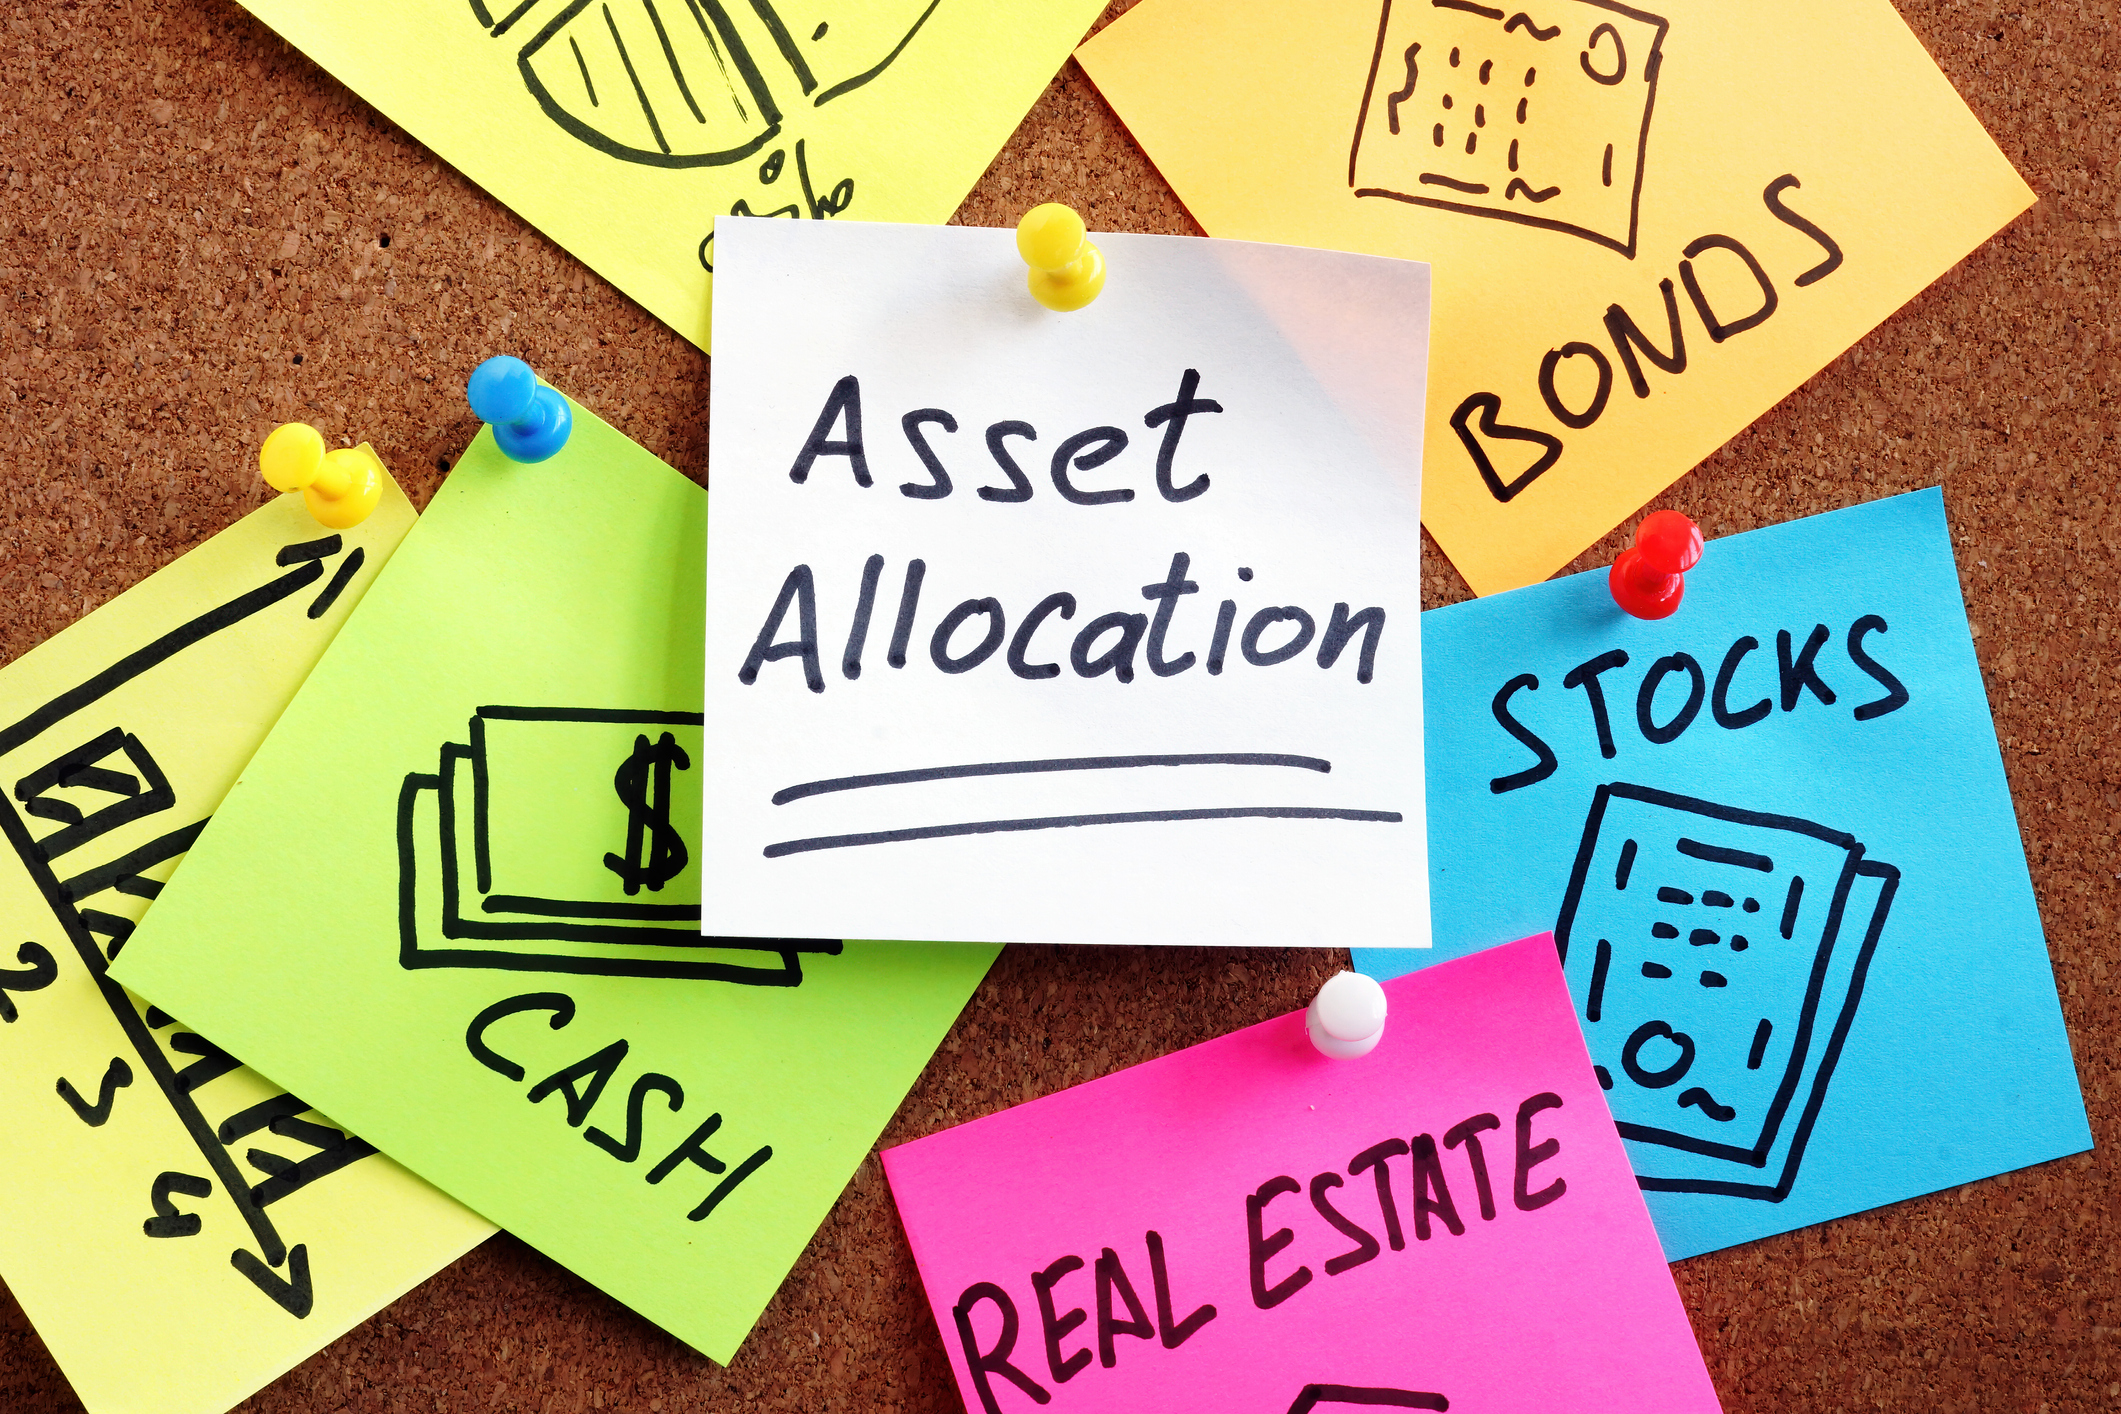 Before you start investing think your asset allocation strategy